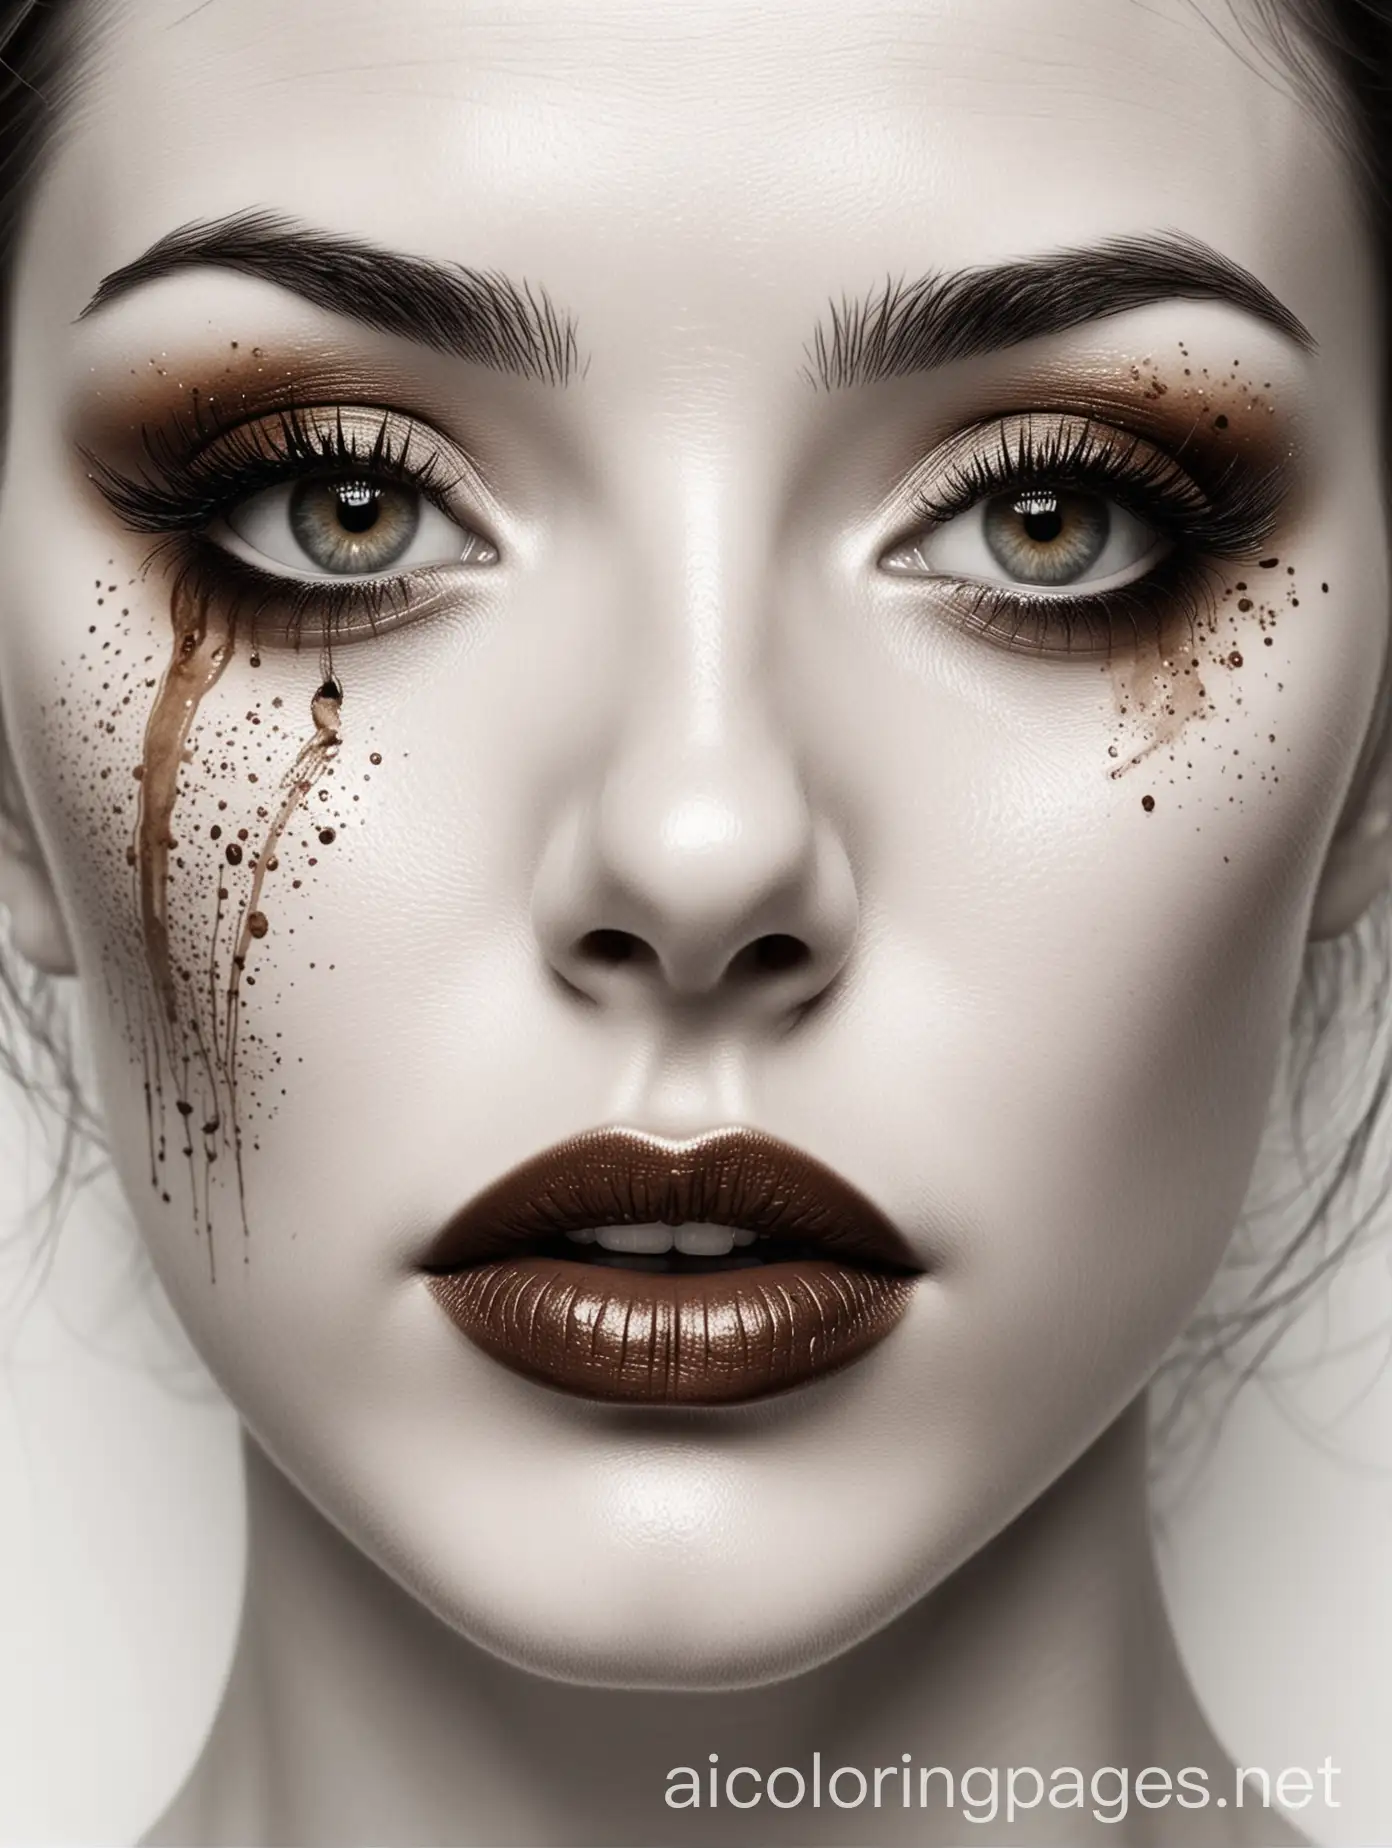 An eye-catching masterpiece of coffee on a white surface, black coffee stains are skillfully manipulated to create a stunning close-up of a woman's face, highlighting her eyes, lips and cheekbones through contrasting shades of white and black. The pure white background highlights the artist's exceptional talent, turning an ordinary accident into a magical work of art , Coloring Page, black and white, line art, white background, Simplicity, Ample White Space. The background of the coloring page is plain white to make it easy for young children to color within the lines. The outlines of all the subjects are easy to distinguish, making it simple for kids to color without too much difficulty